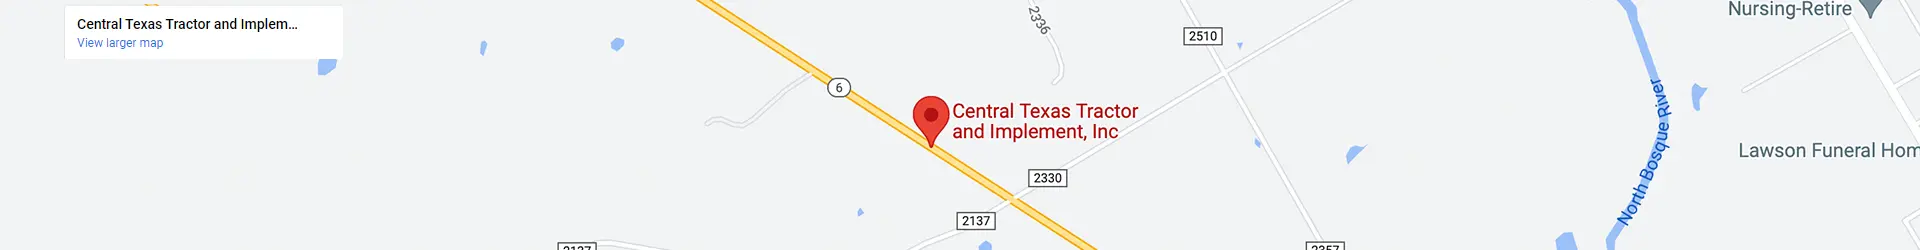 Central Texas Tractor & Implement, INC.